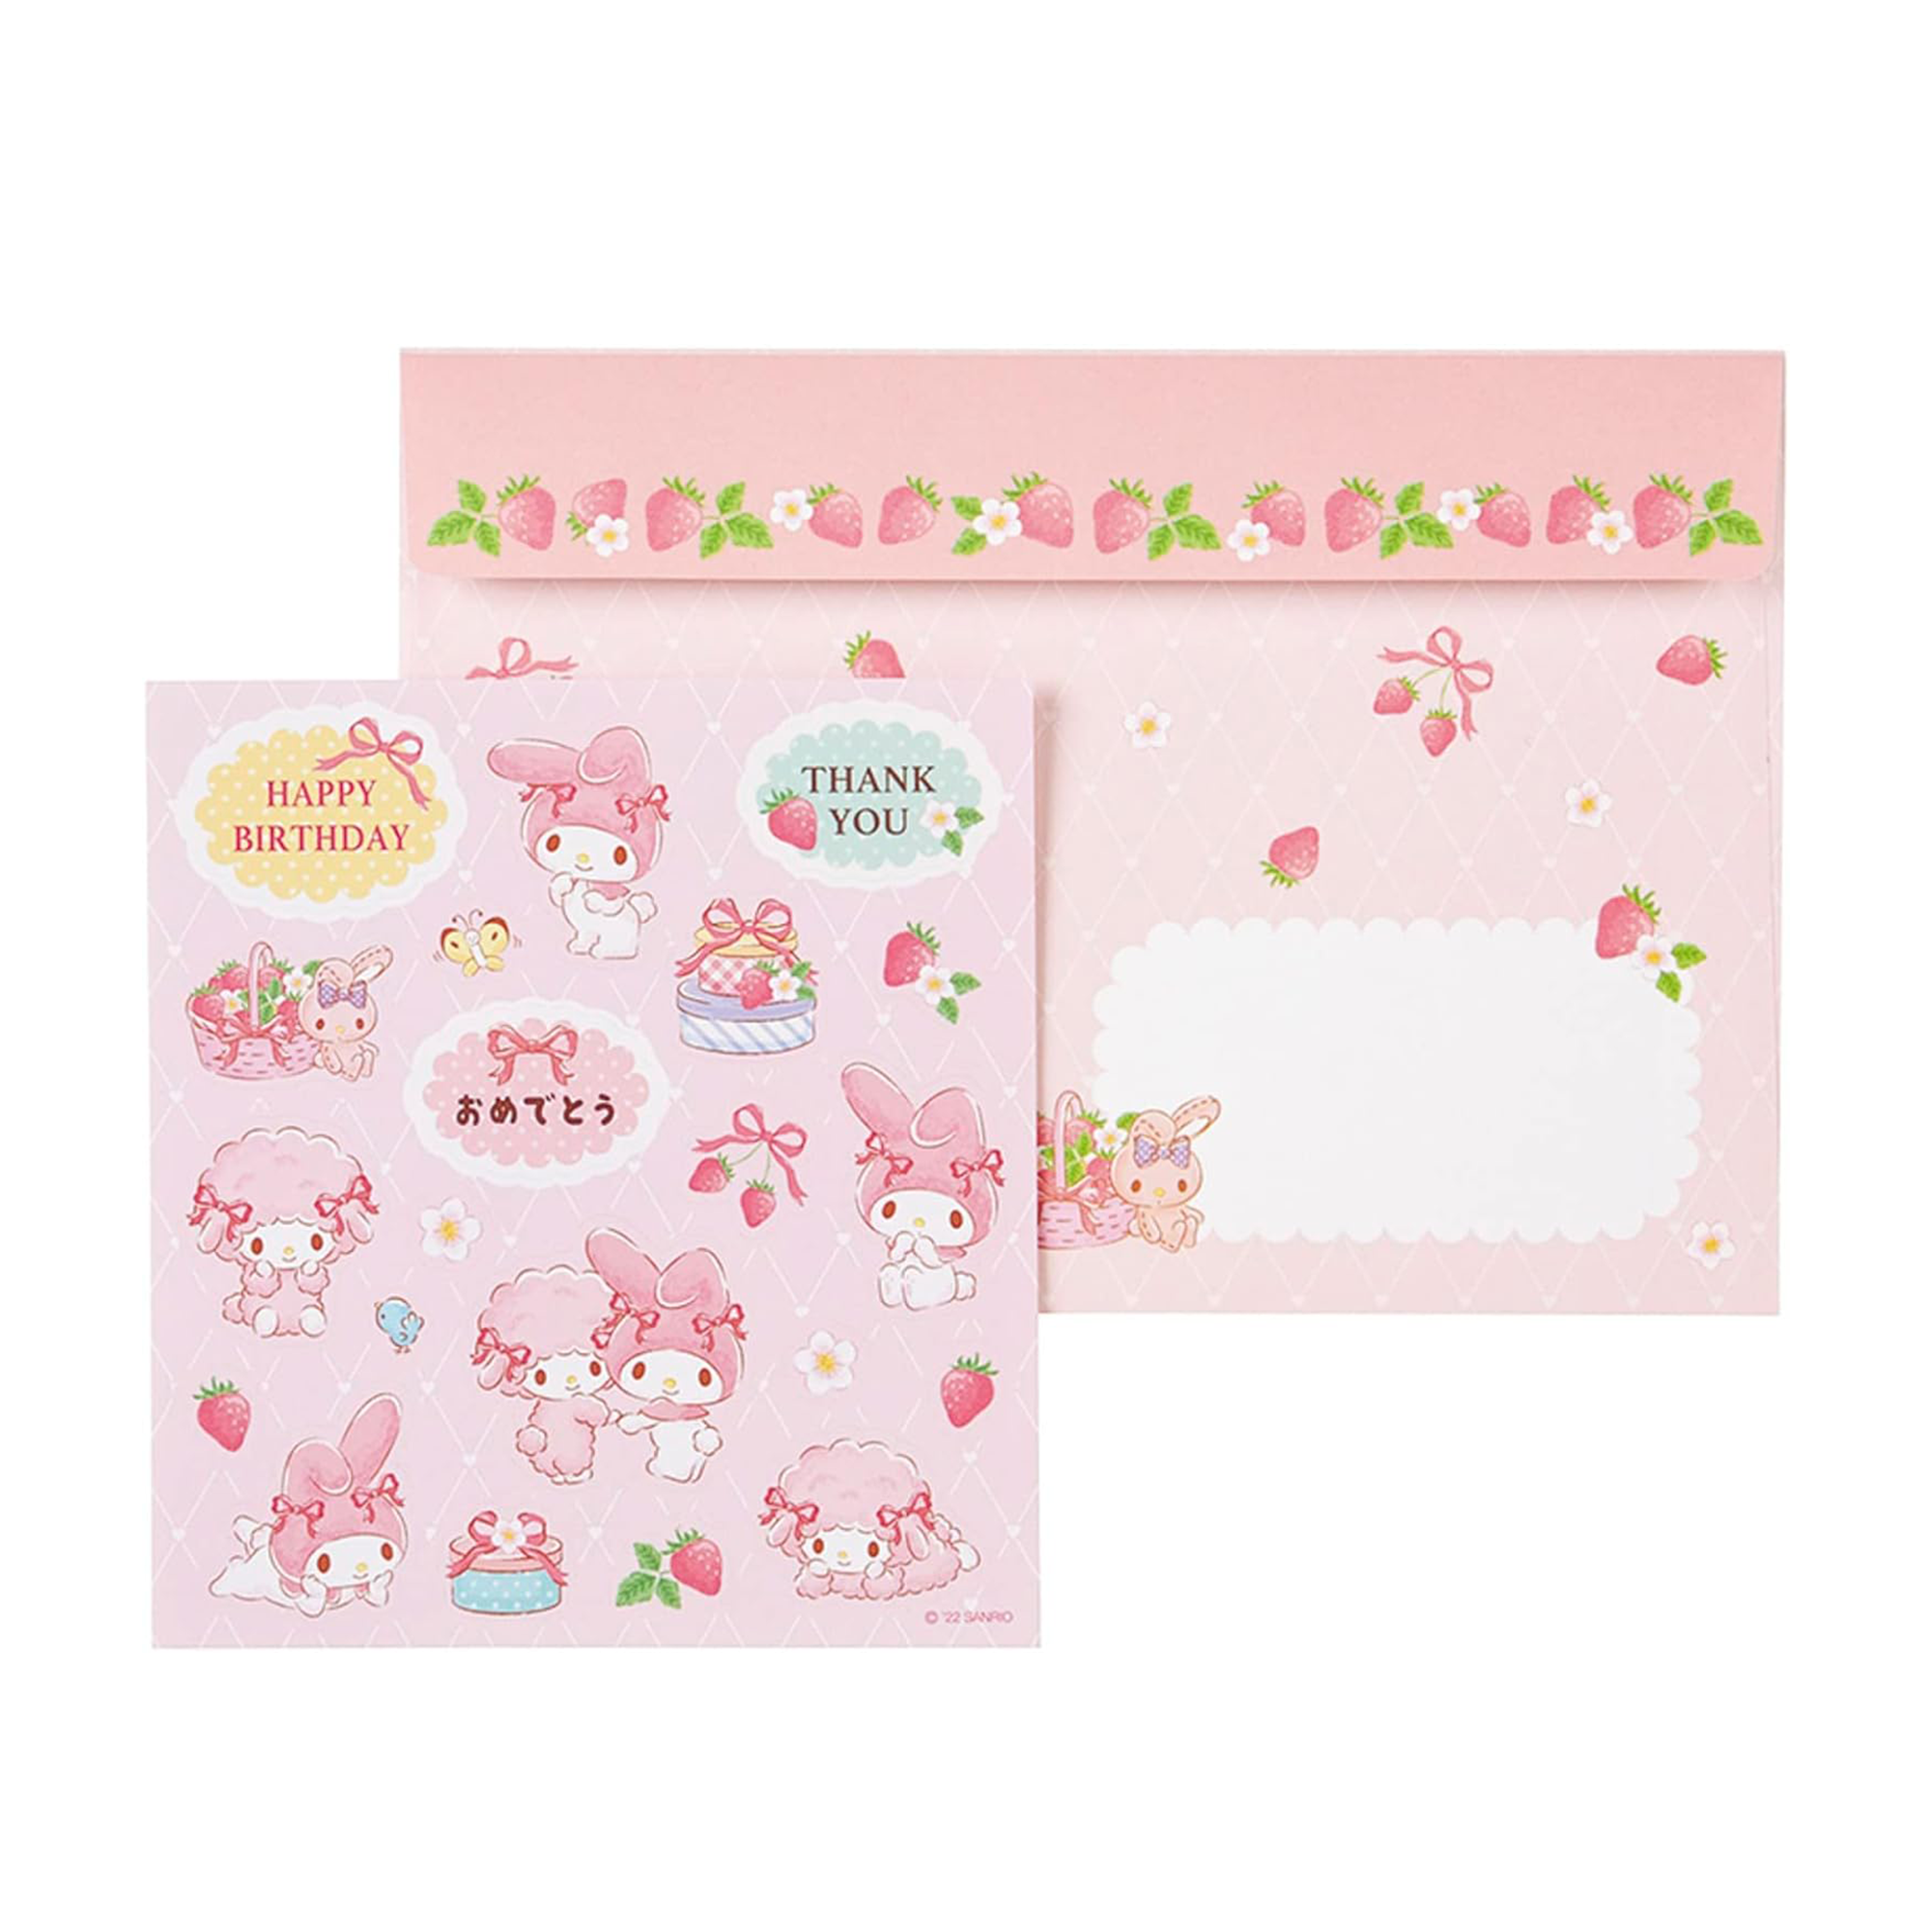 Sanrio Smiles, Hello Kitty, Valentines, Fold And Seal Cards, Stickers,  Supply, Kids Craft, Hobby, Stationery, Vintage, ~20-01-1061